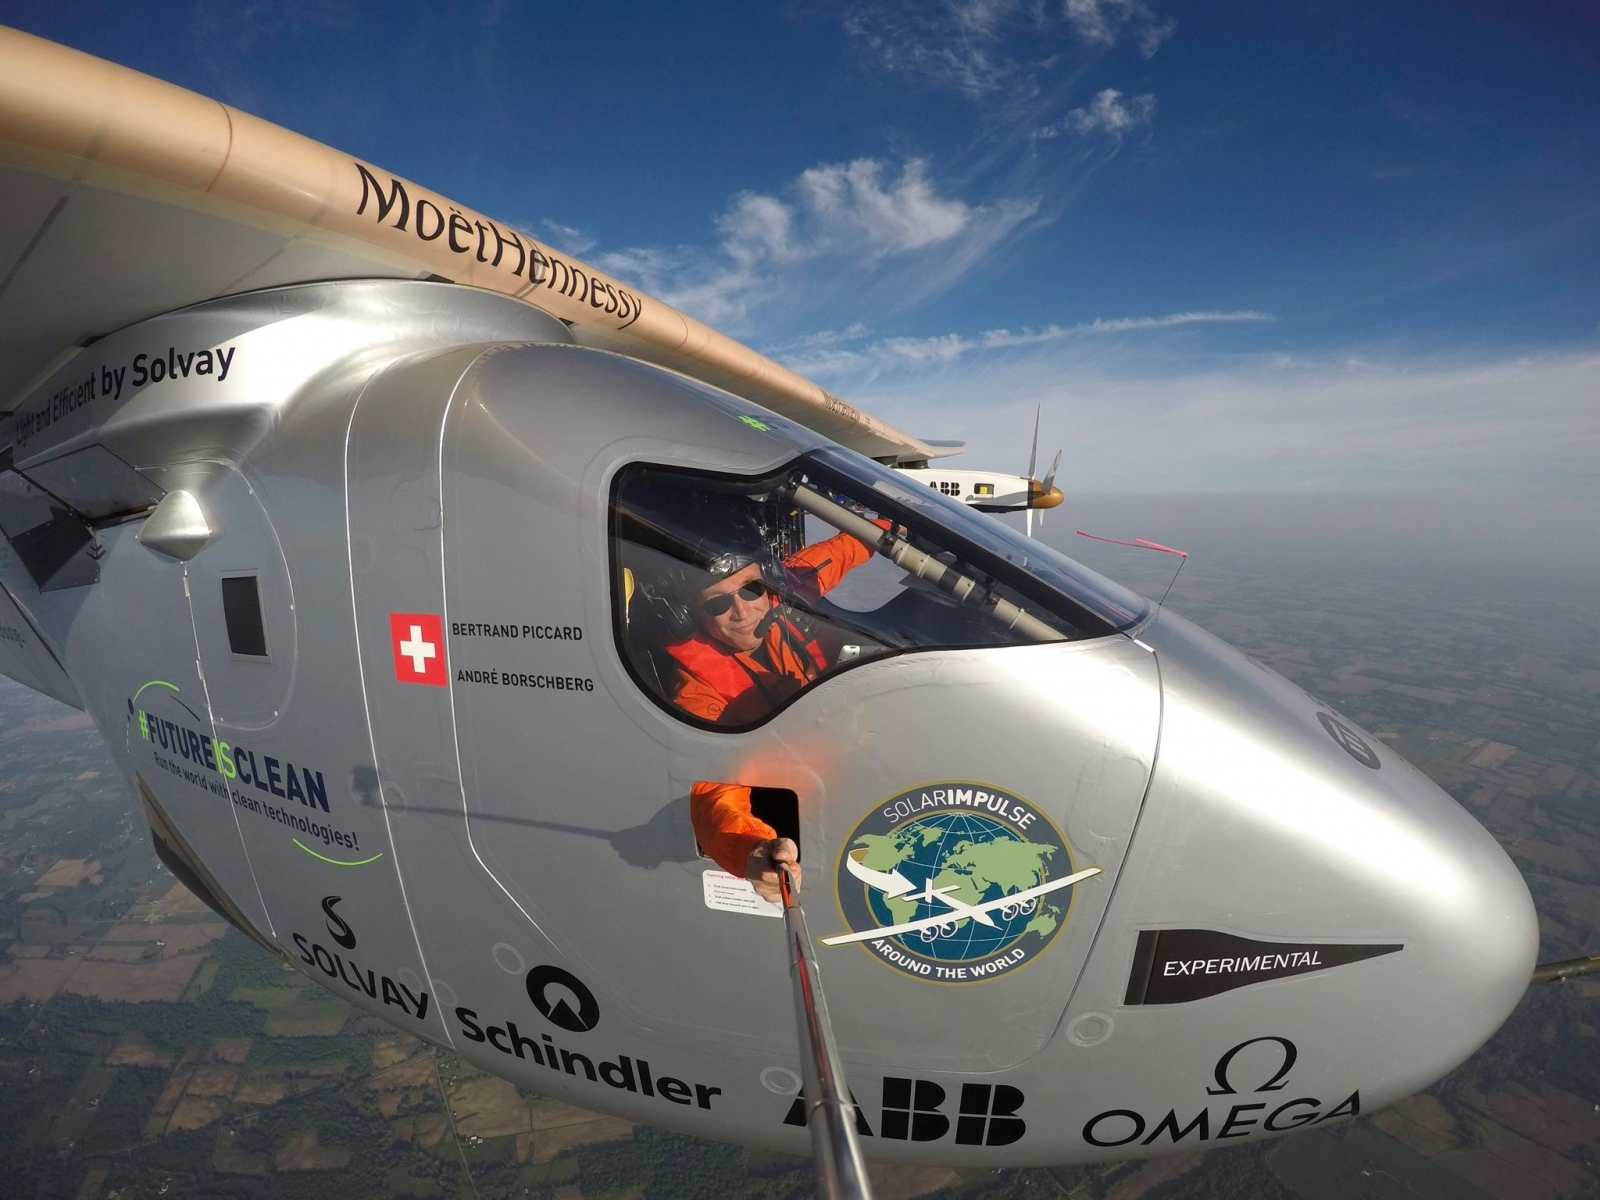 ZUR ERDUMRUNDUNG DES SOLARFLUGZEUGS "SOLAR IMPULSE 2" STELLEN WIR IHNEN FOLGENDES BILDMATERIAL ZUR VERFUEGUNG: - epa05329379 A handout picture made available on 26 May 2016 shows Swiss adventurer and pilot Bertrand Piccard talking an extreme self portait during the flight of Solar Impulse 2 (Si2) to Lehigh Valley, Pennsylvania, USA, 25 May 2016. Solar Impulse successfully landed in Lehigh Valley with Bertrand Piccard at the controls after 17 hours of flight. Departed from Abu Dhabi on 09 March 2015, the Round-the-World Solar Flight will take 500 flight hours and cover 35,000 kilometers.  EPA/SOLAR IMPULSE/REZO/HANDOUT  HANDOUT EDITORIAL USE ONLY/NO SALES USA SOLAR IMPULSE 2 ERDUMRUNDUNG